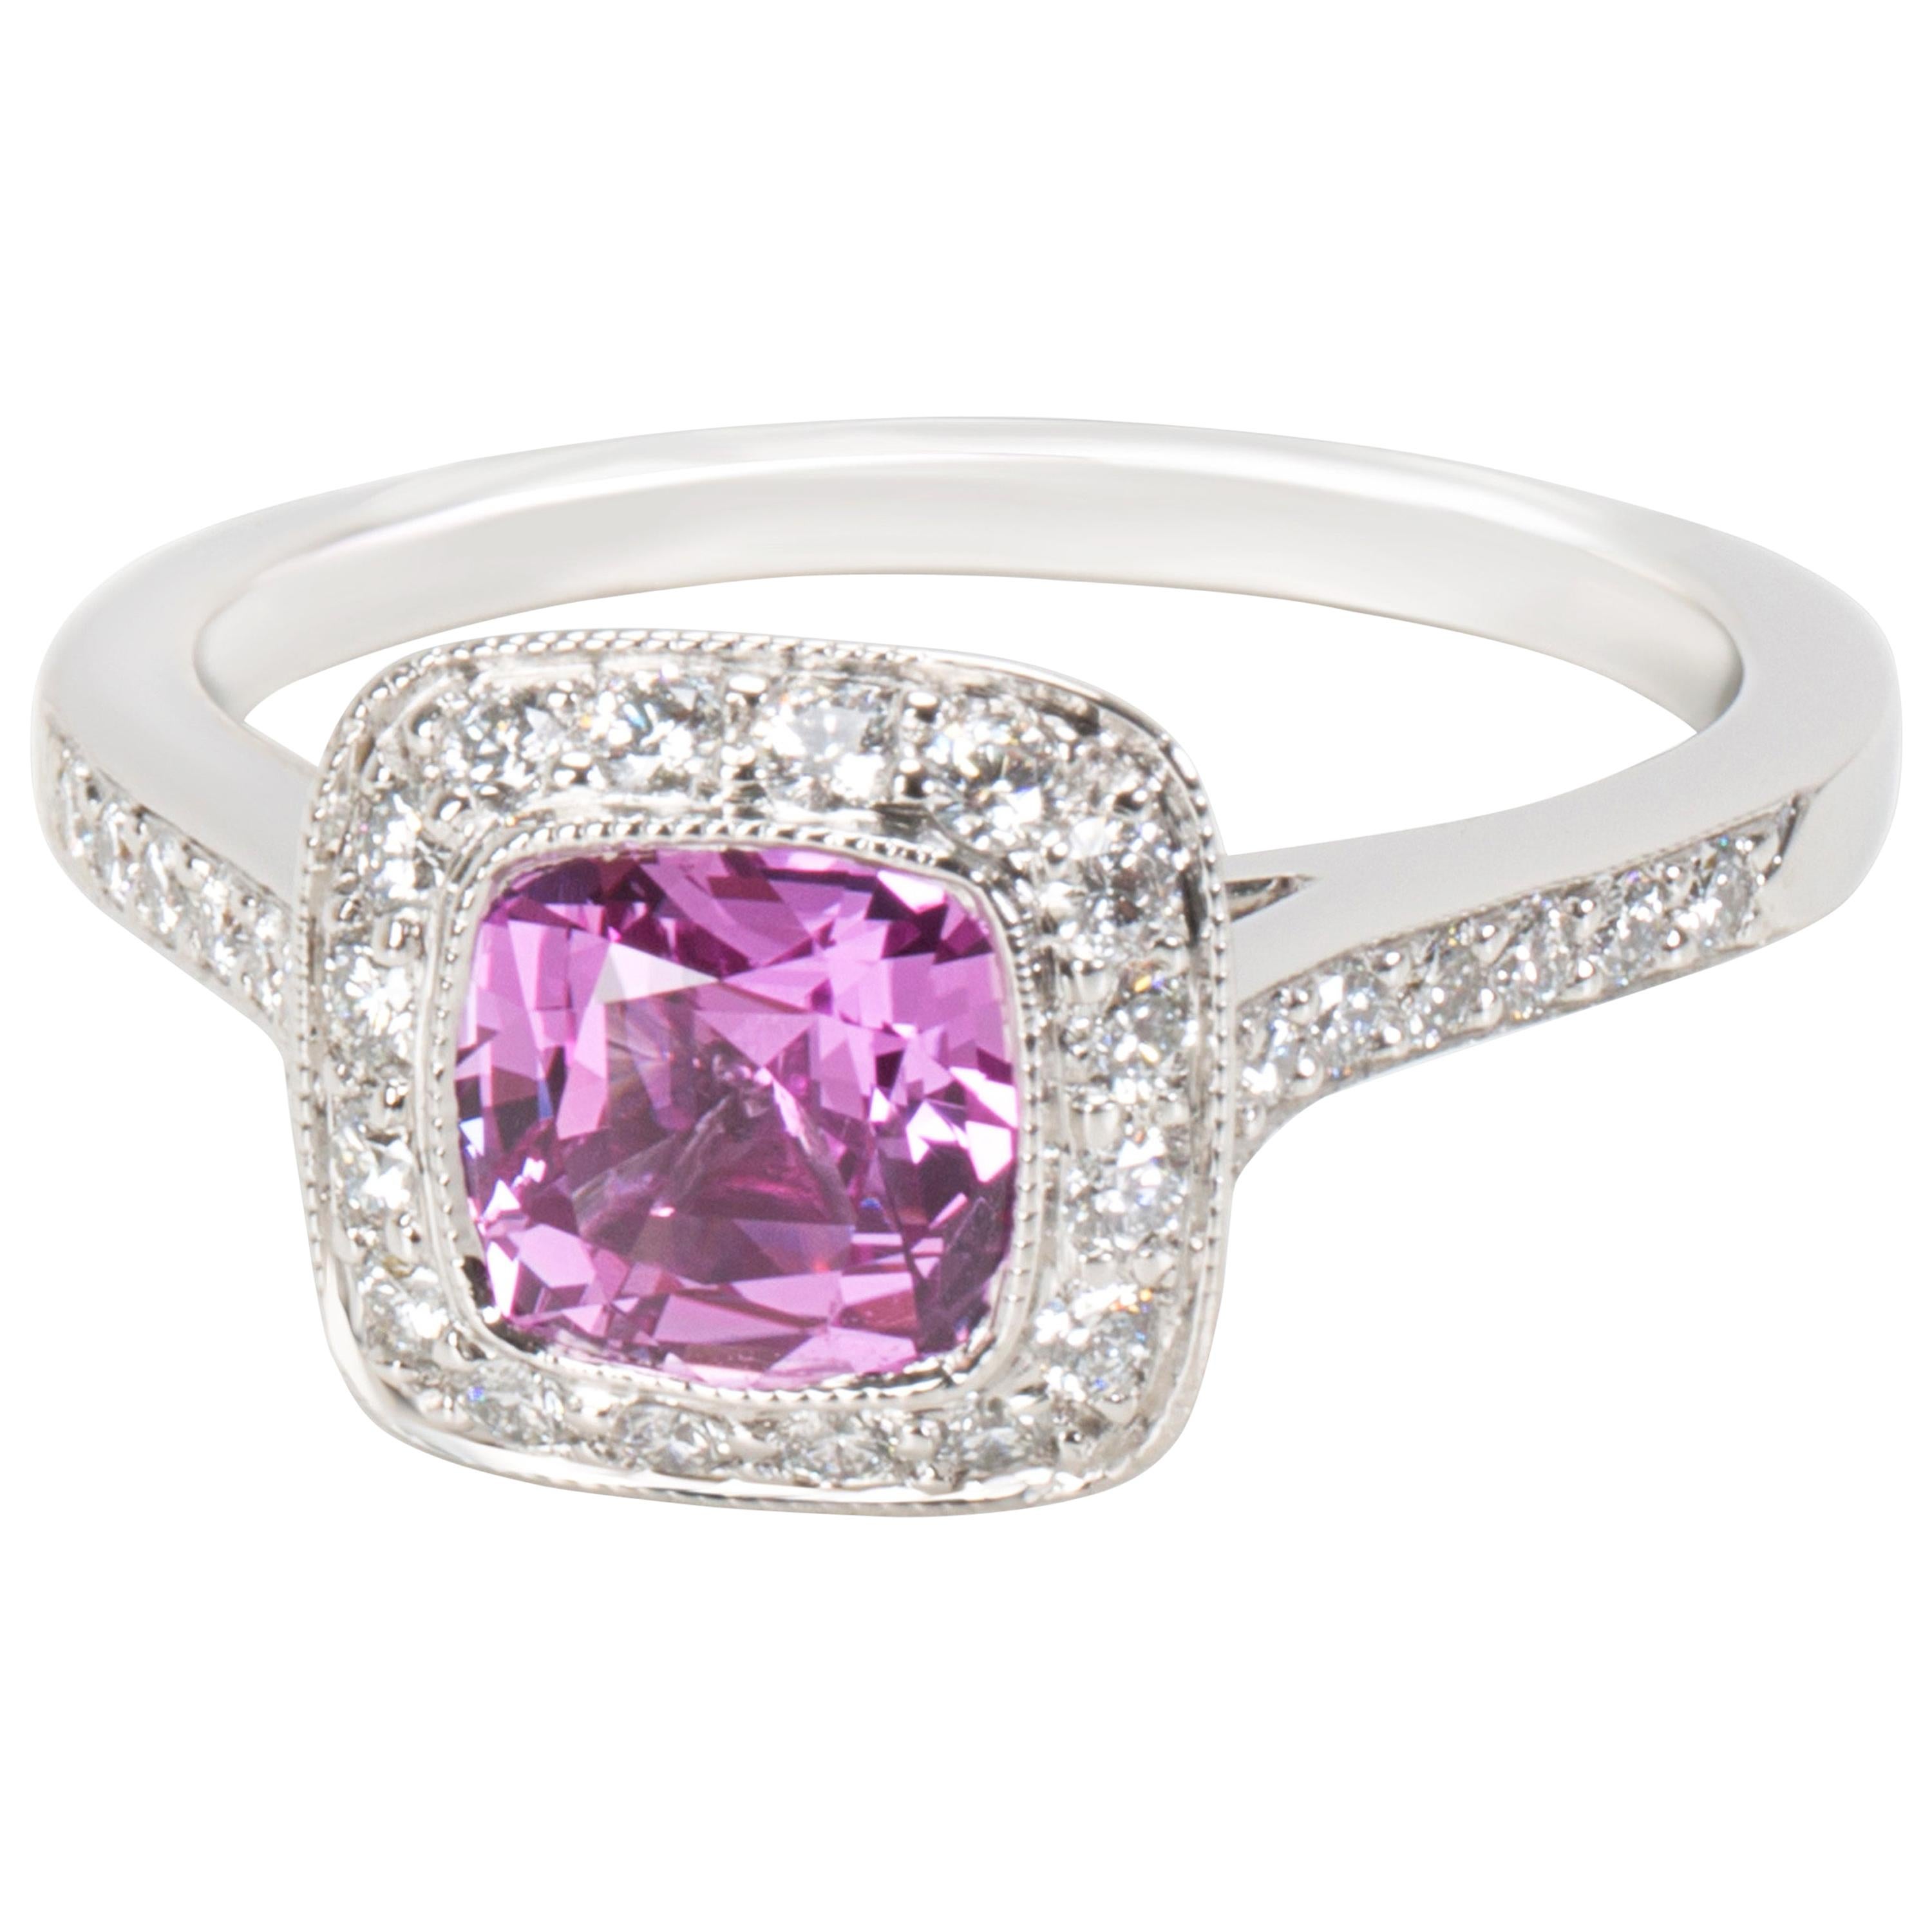 Tiffany & Co. Legacy Pink Sapphire and Diamond Ring in Platinum